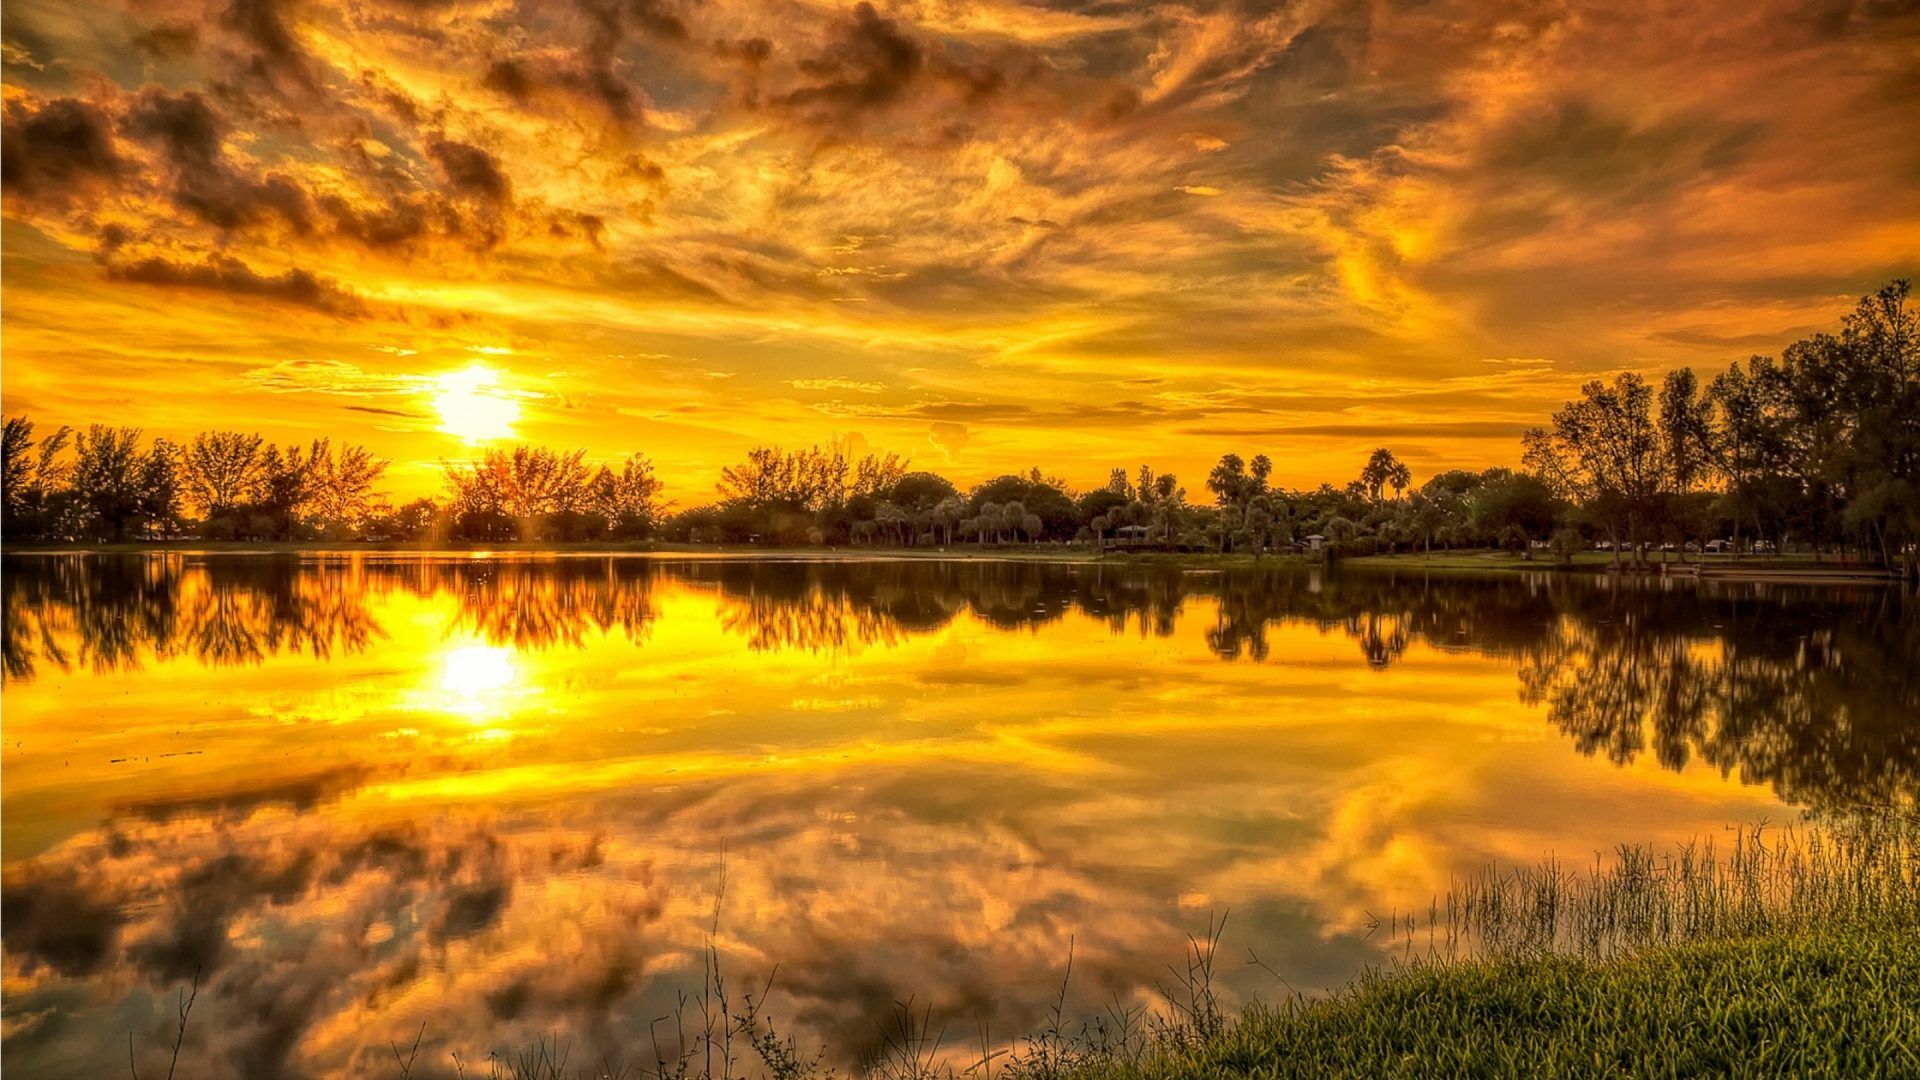 Sunset Calm Lake Trees Grass Yellow Sky Clouds Reflection In Water Free Wallpaper Background 2880x1800, Wallpaper13.com